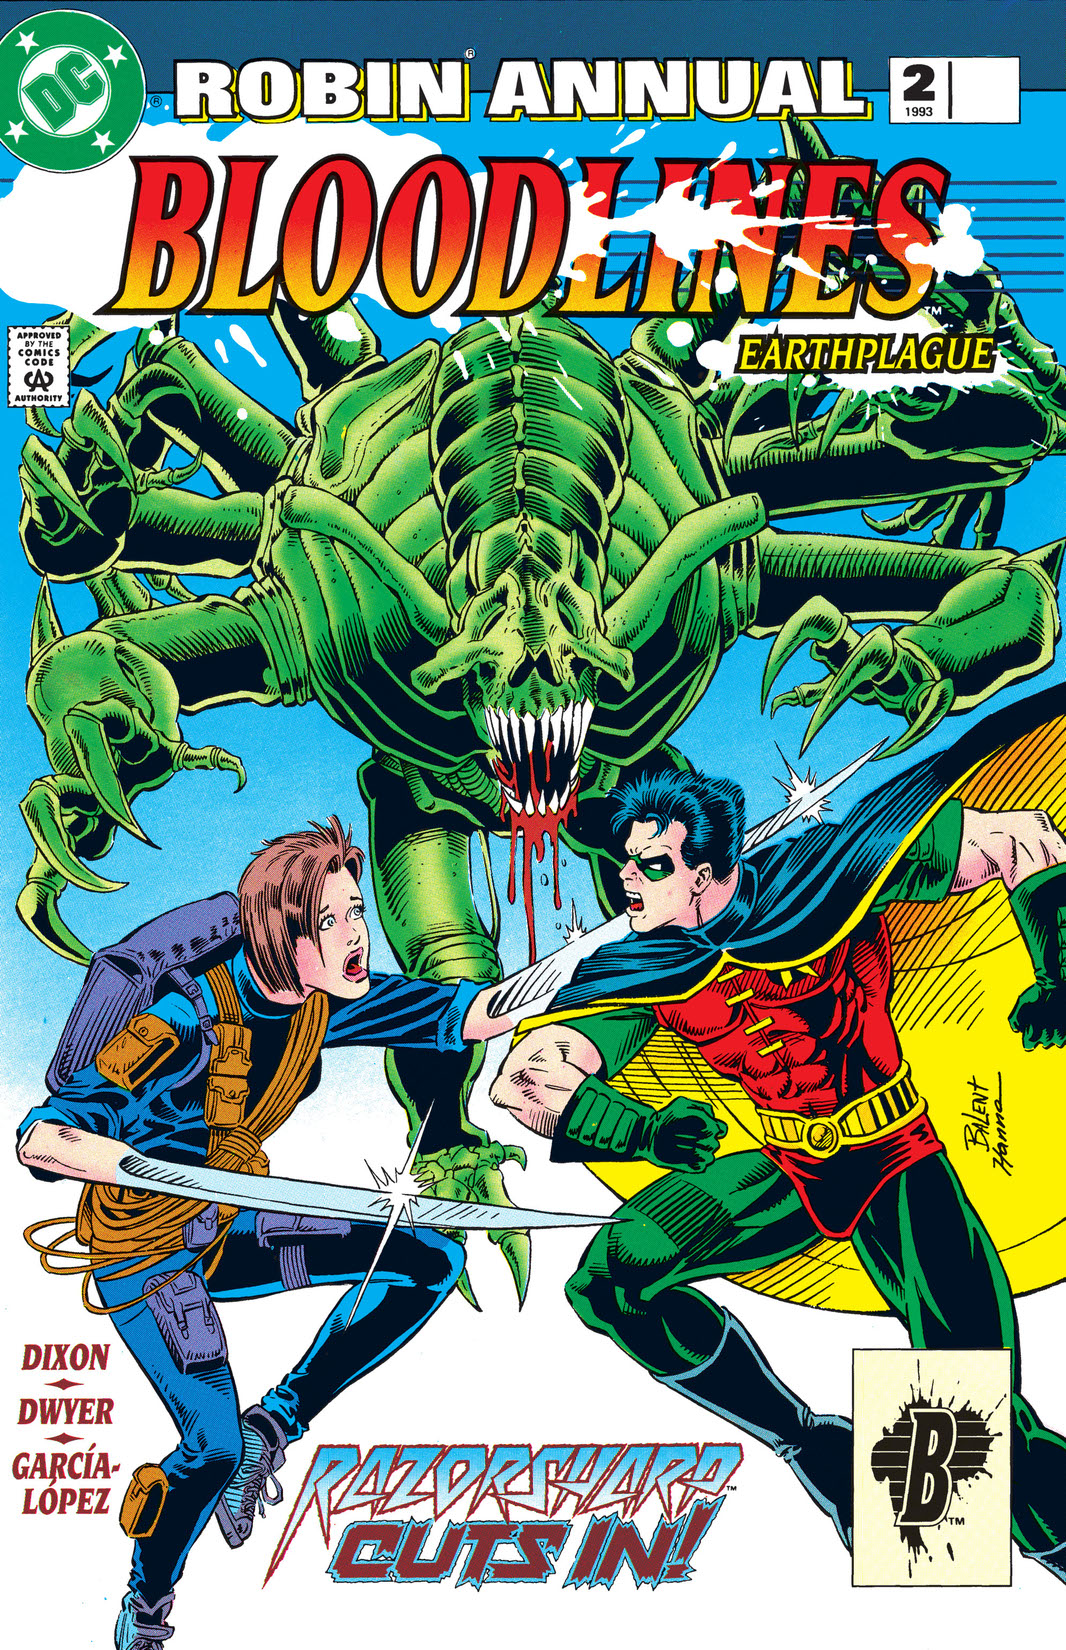 Robin Annual (1992-) #2 preview images